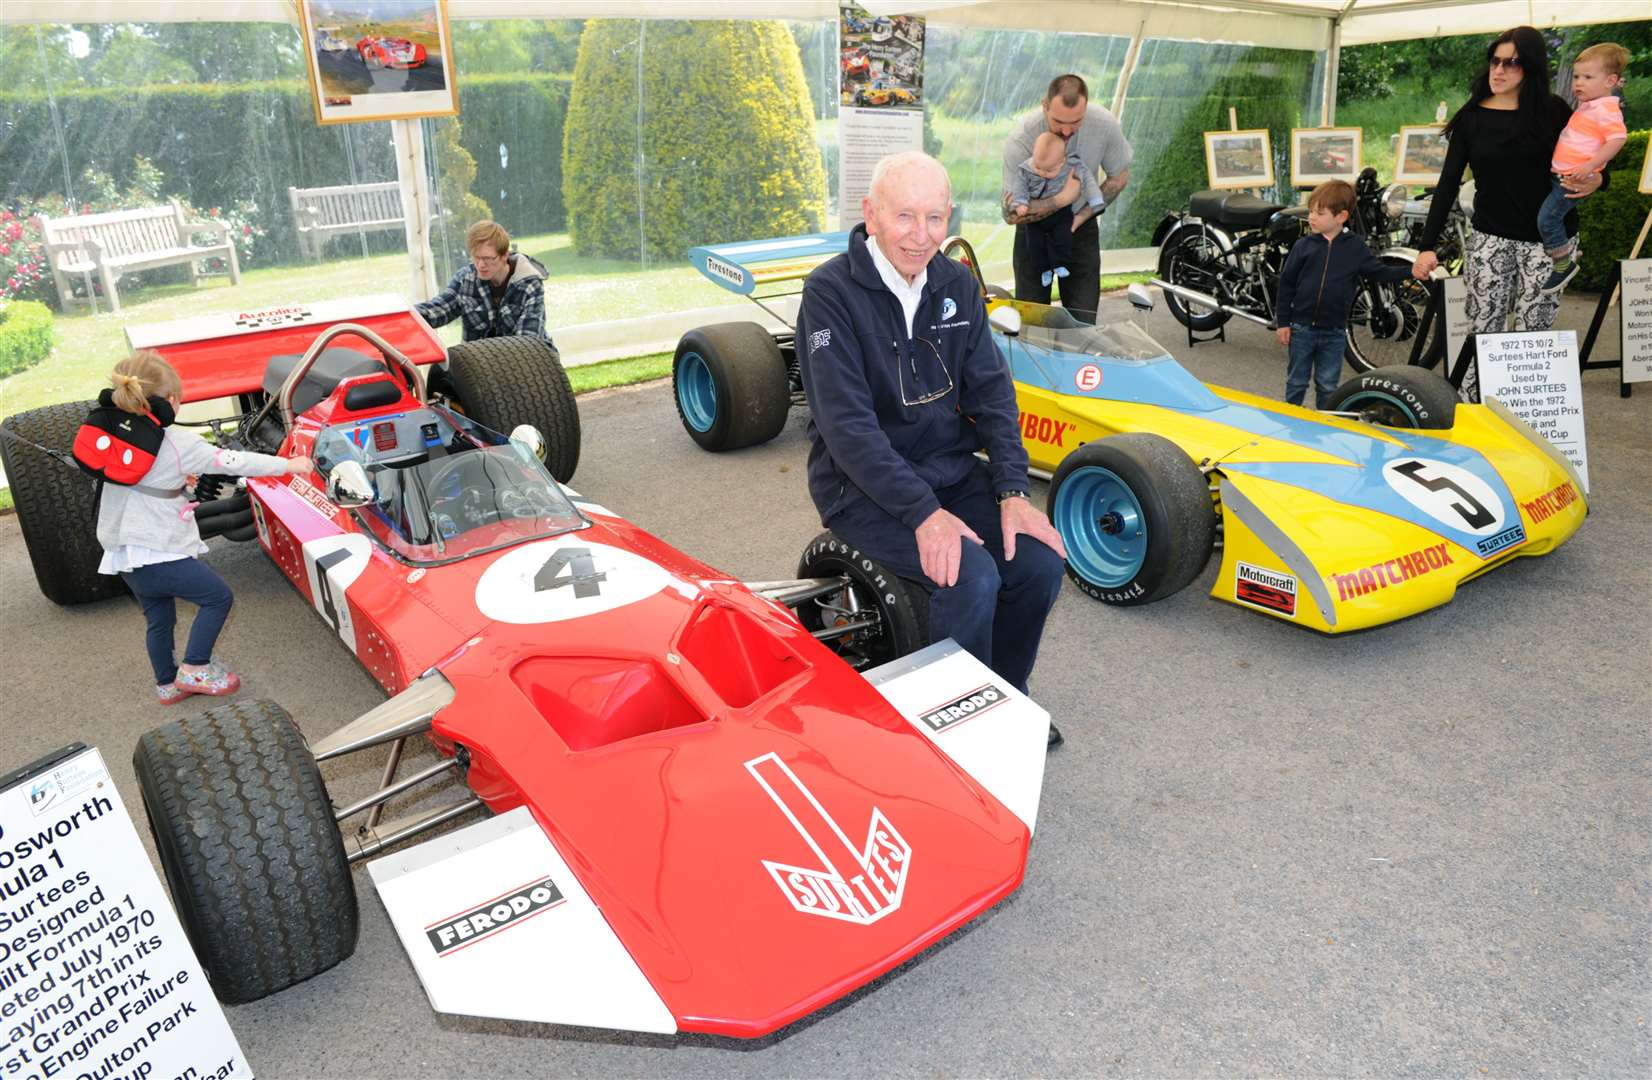 Surtees displayed his race cars and bikes at Hever Castle in 2015 to raise money for the Henry Surtees Foundation. Malvern says he "still had spanners in his hands until the end", replacing the magnesium wheels on the F1 cars in his collection. Picture: Simon Hildrew